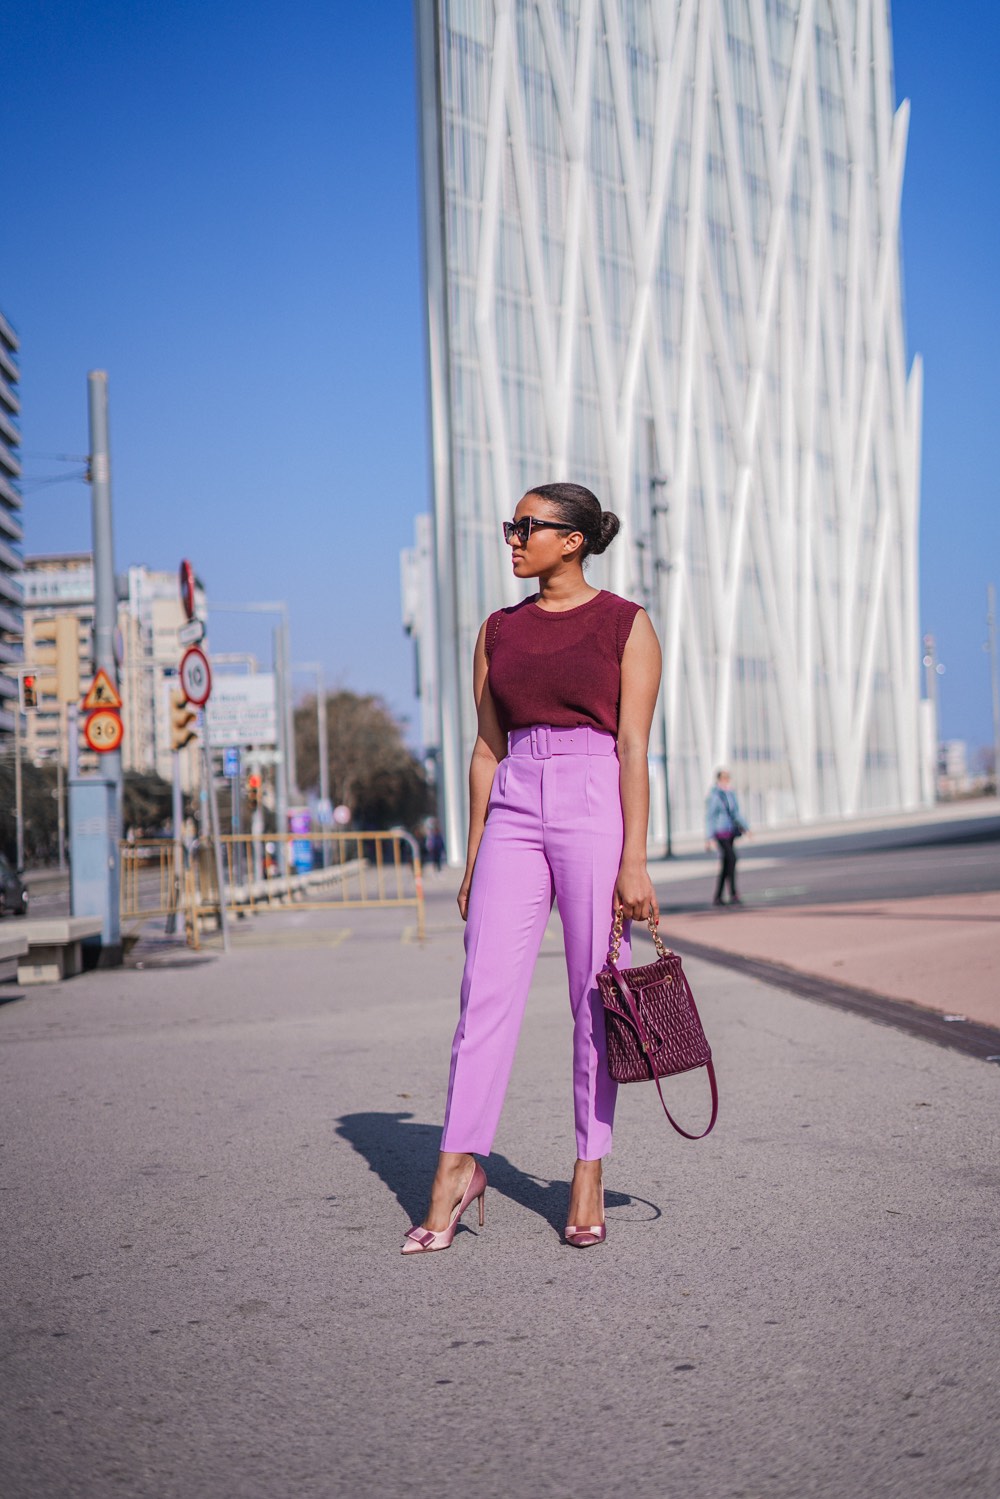 German fashion blogger wearing an all lilac look